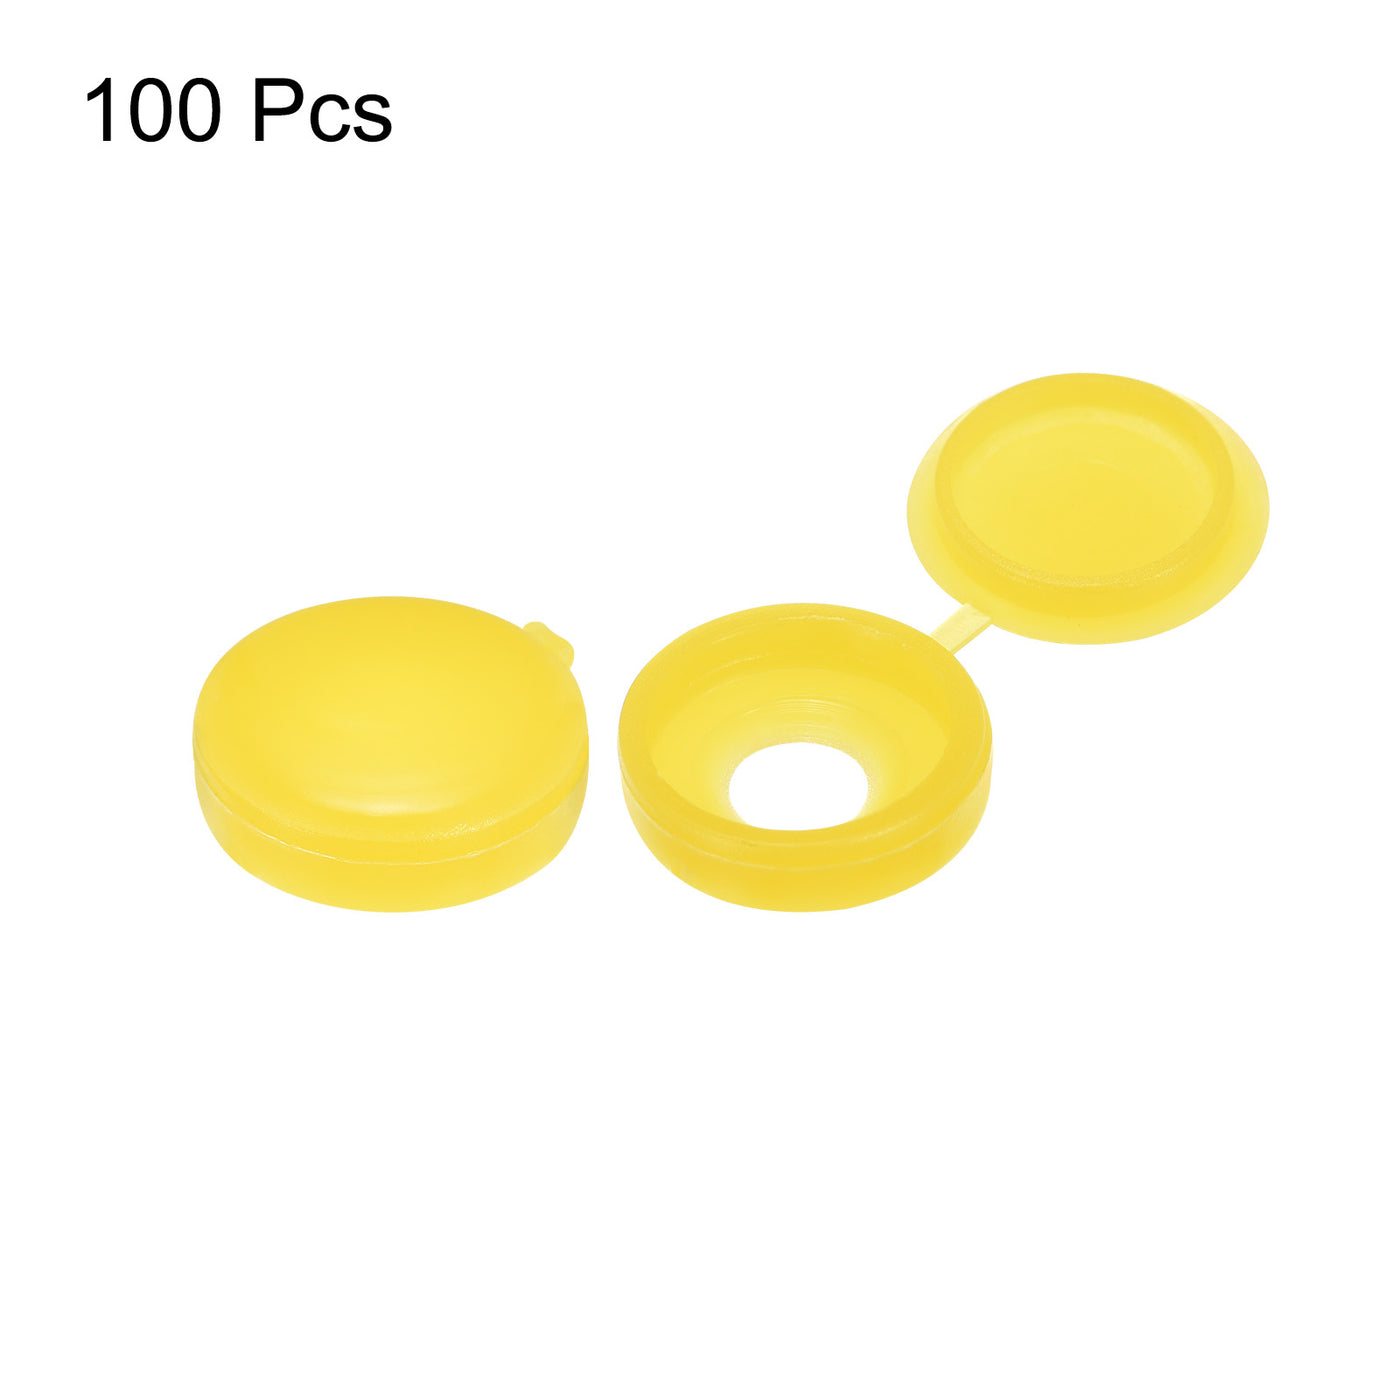 uxcell Uxcell 100Pcs 5mm Hinged Screw Cover Caps Plastic Fold Screw Snap Covers, Yellow